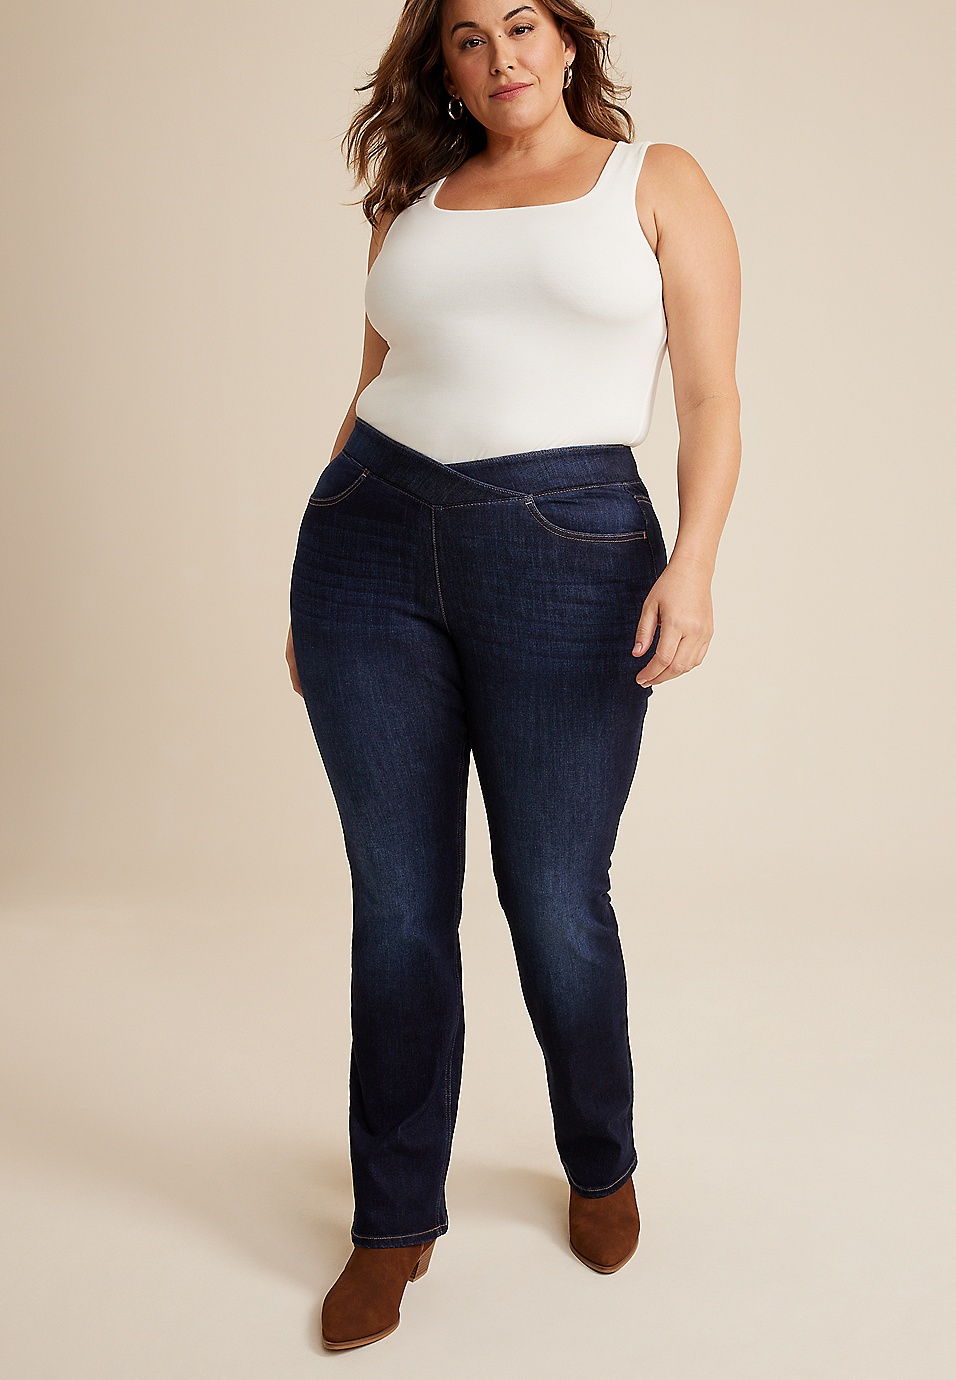 Plus Size m jeans by Cool Comfort Crossover Pull On High Rise Barely Boot Jean | maurices